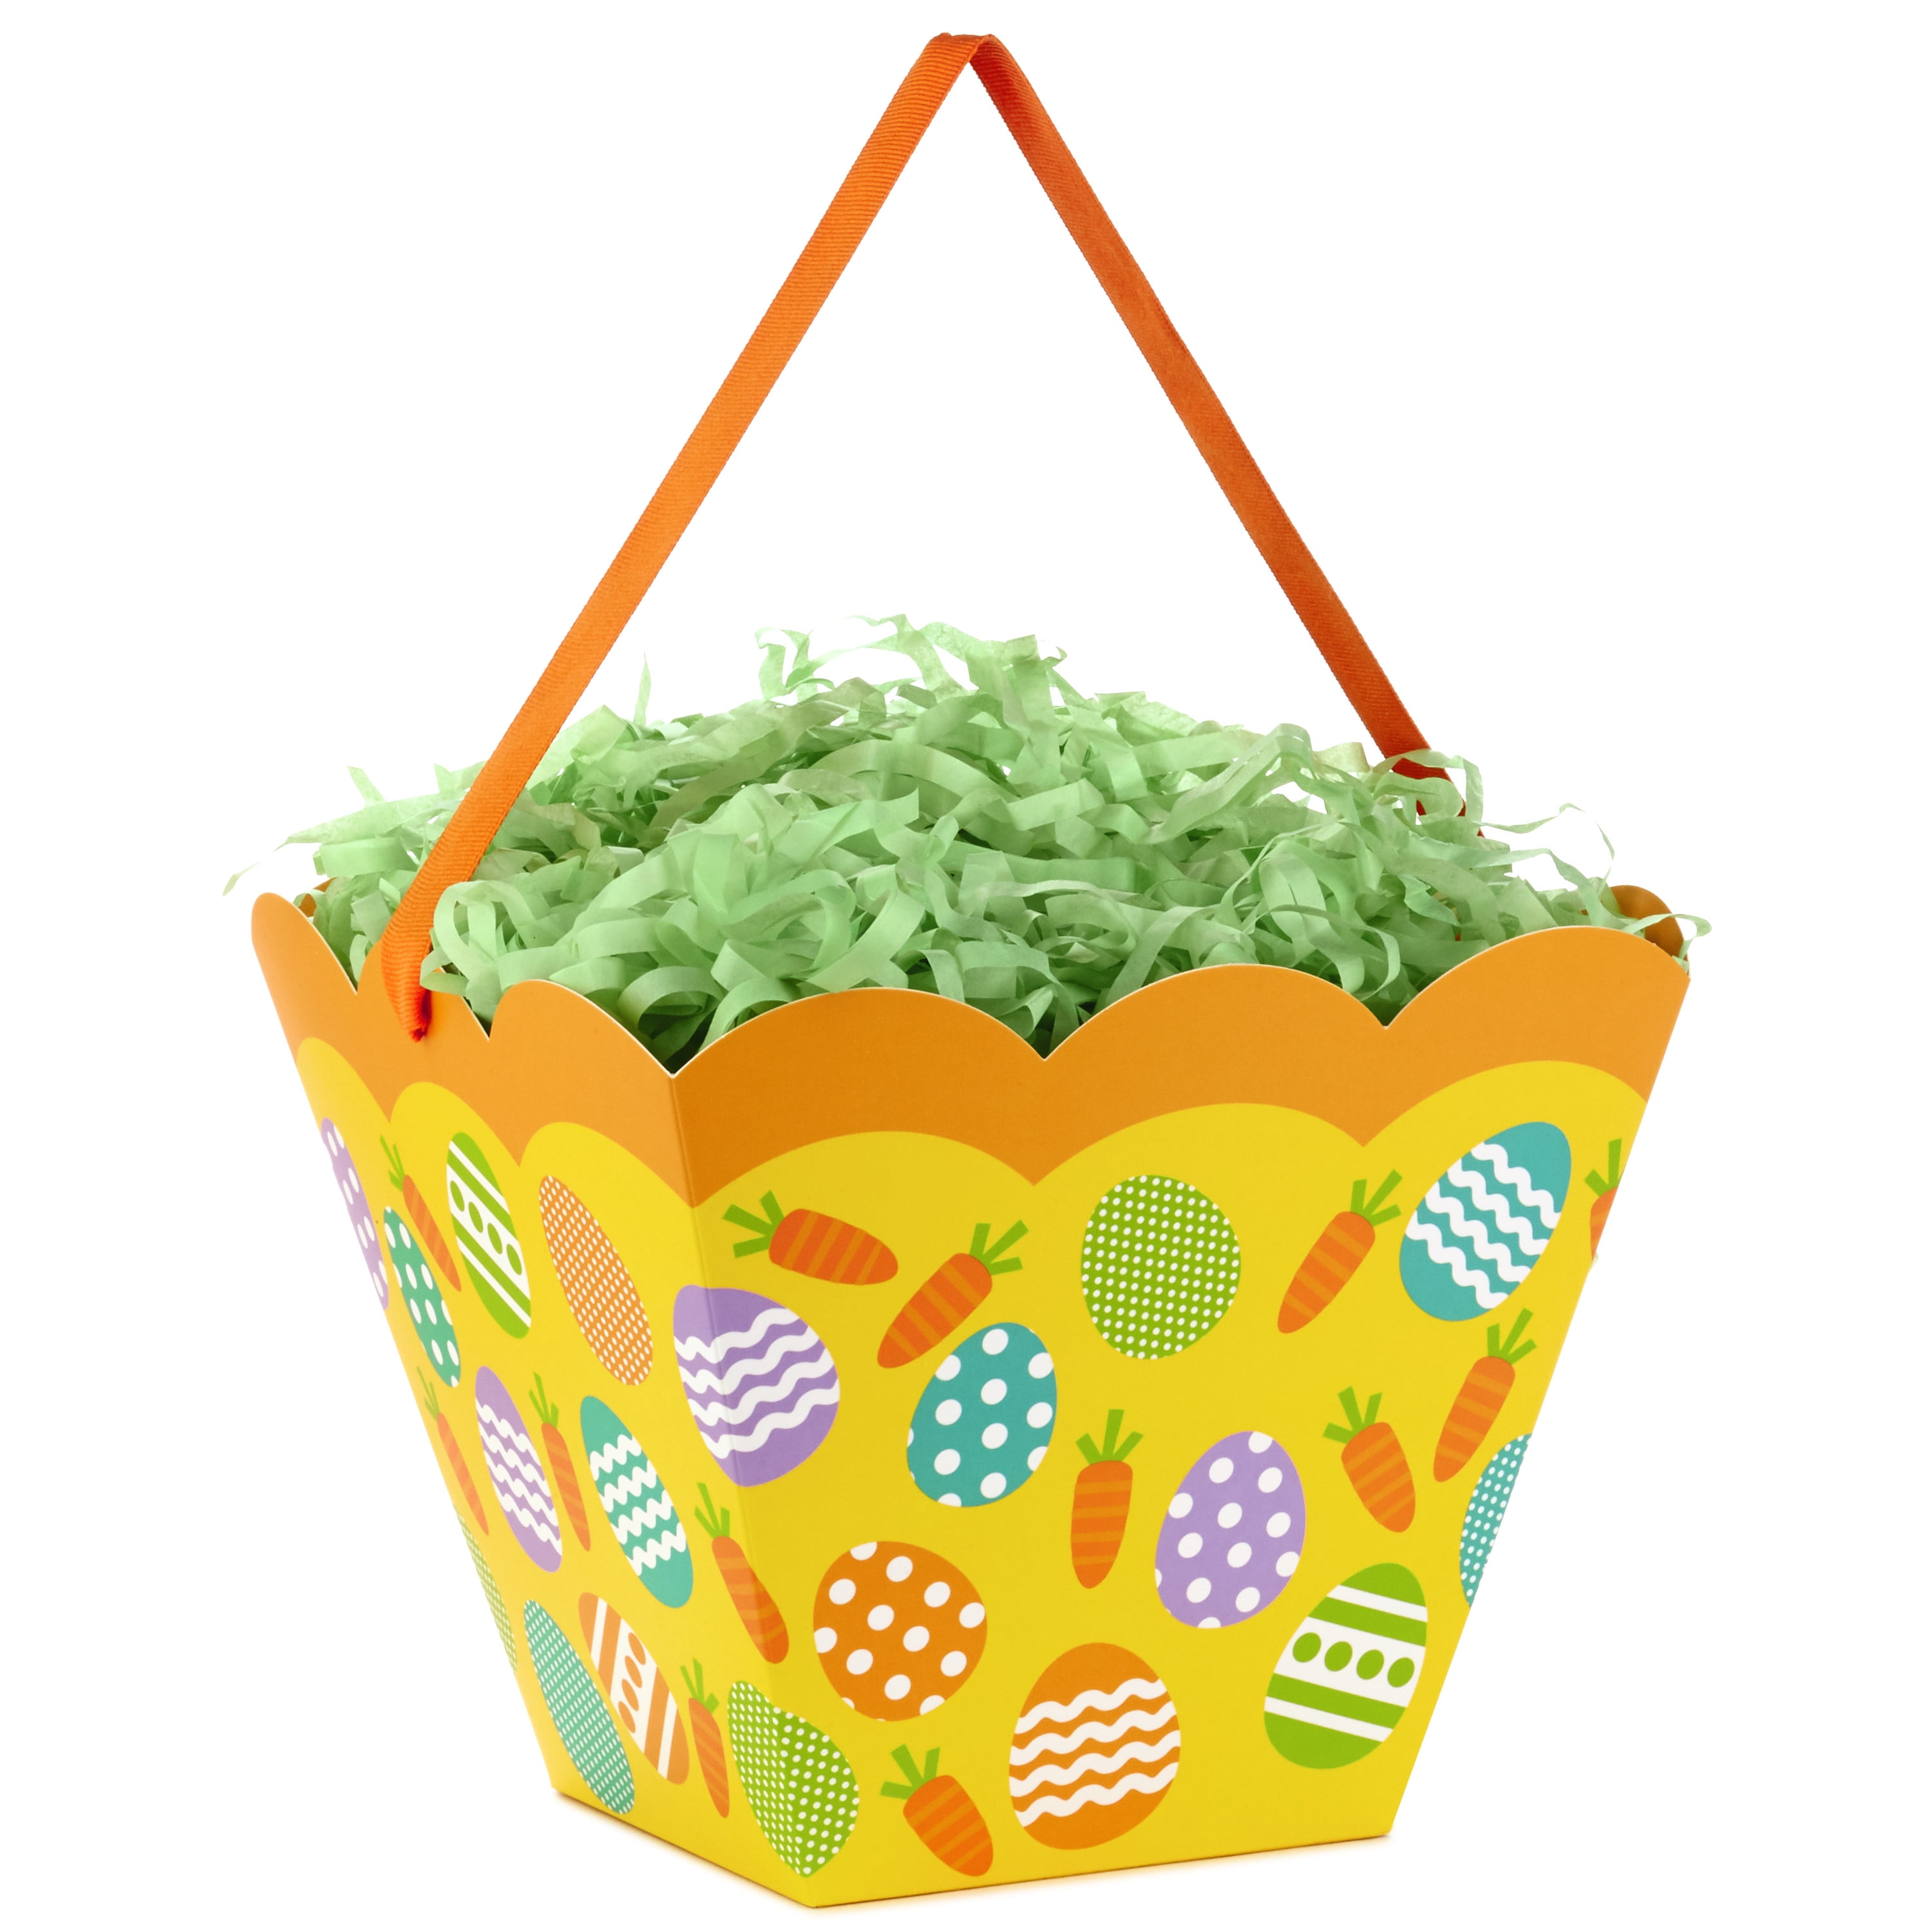 1 x Easter Basket Medium Size  Large Carry Handle Asstd Colours Party Gift Bag 